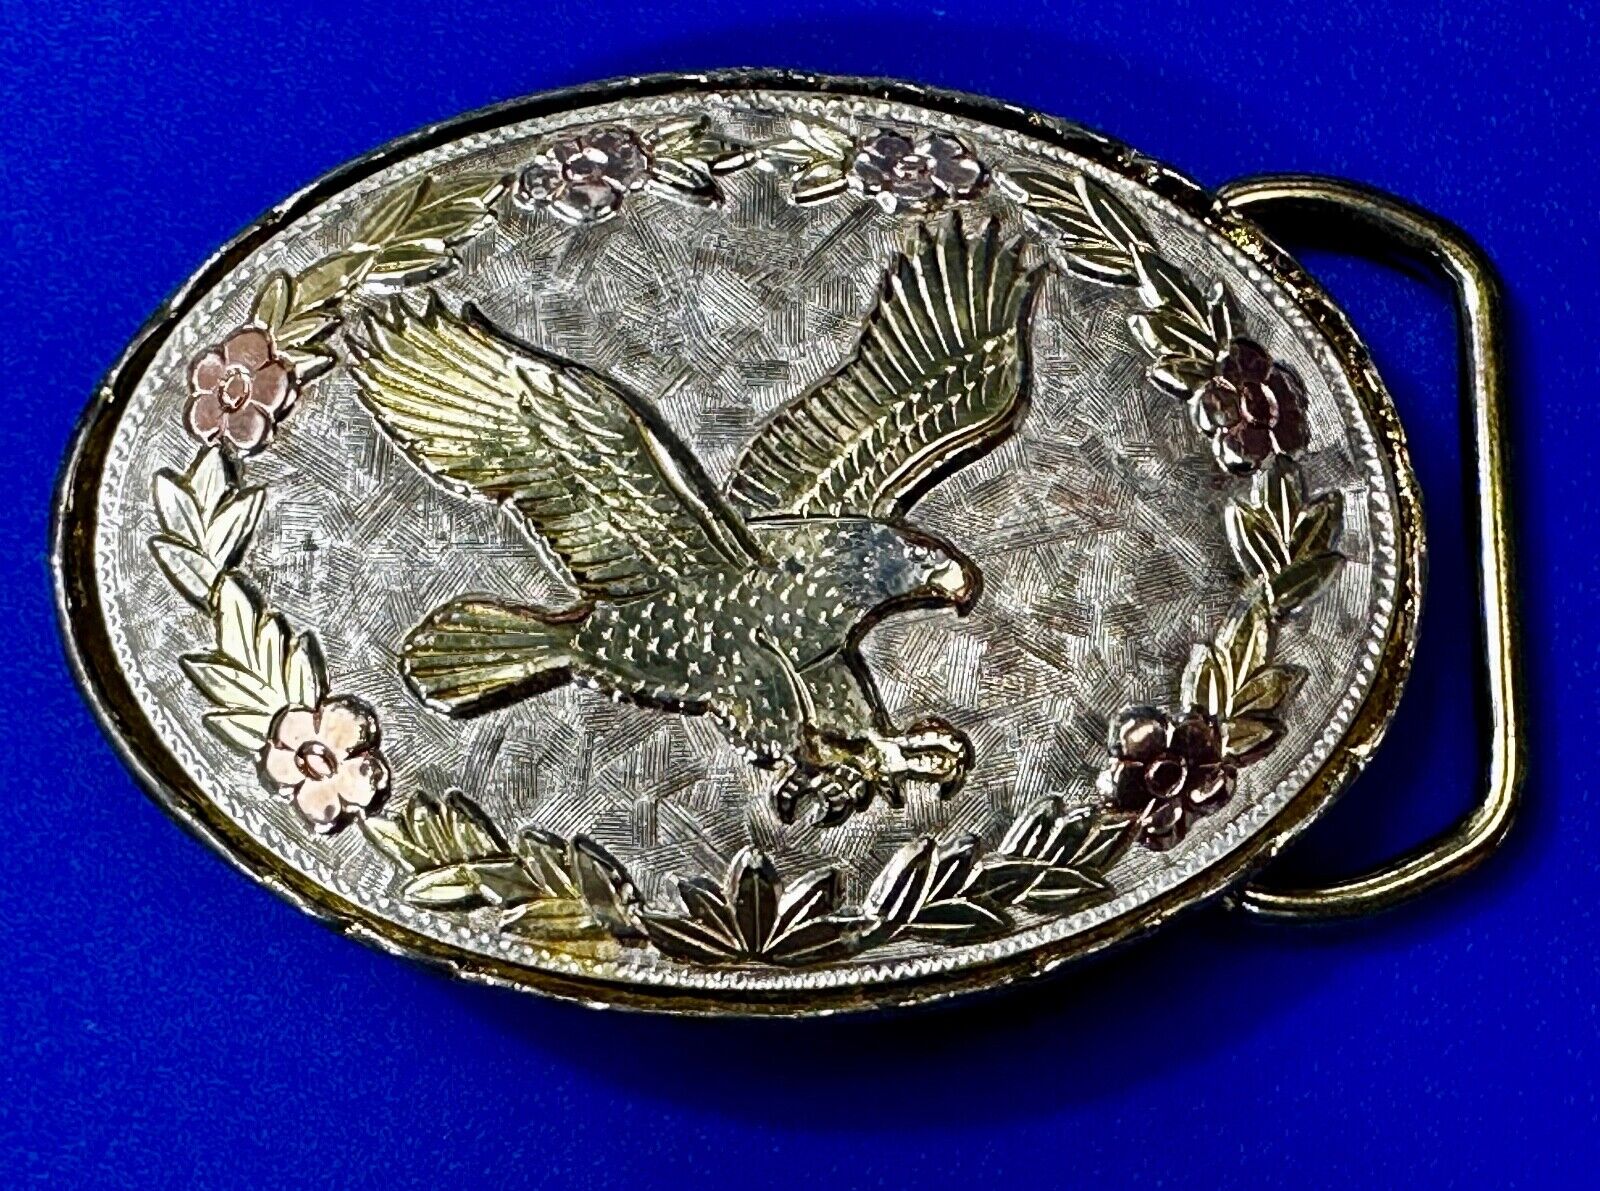 Soaring High Flying Bald Eagle Vtg. Mixed Metal Western Small Belt Buckle by W